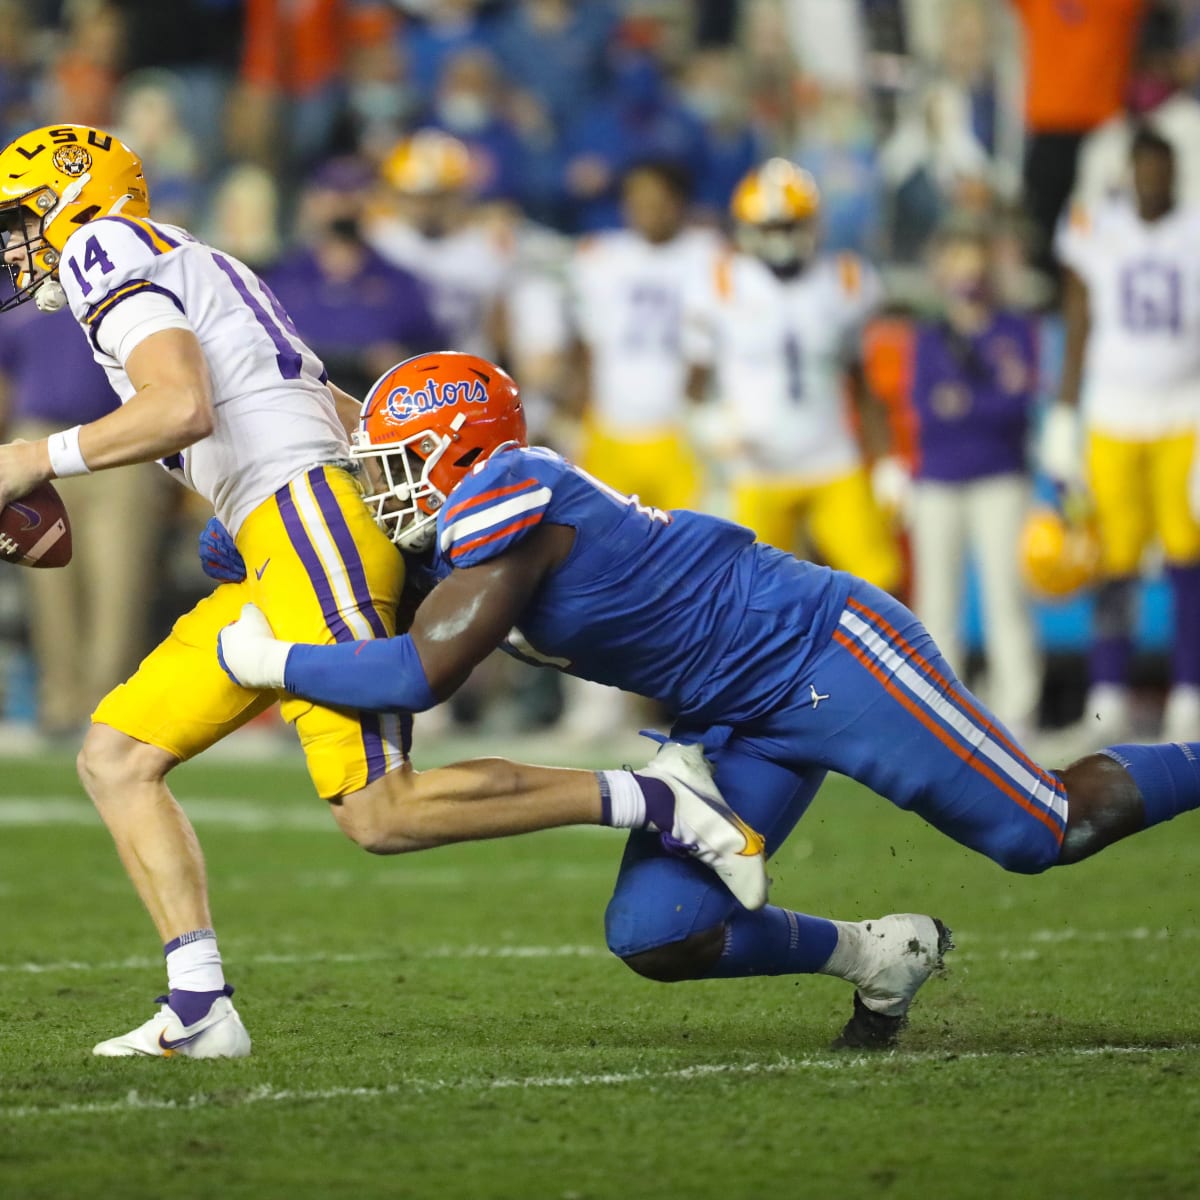 Zach Carter to Bengals in NFL Draft: Florida Gators DL will